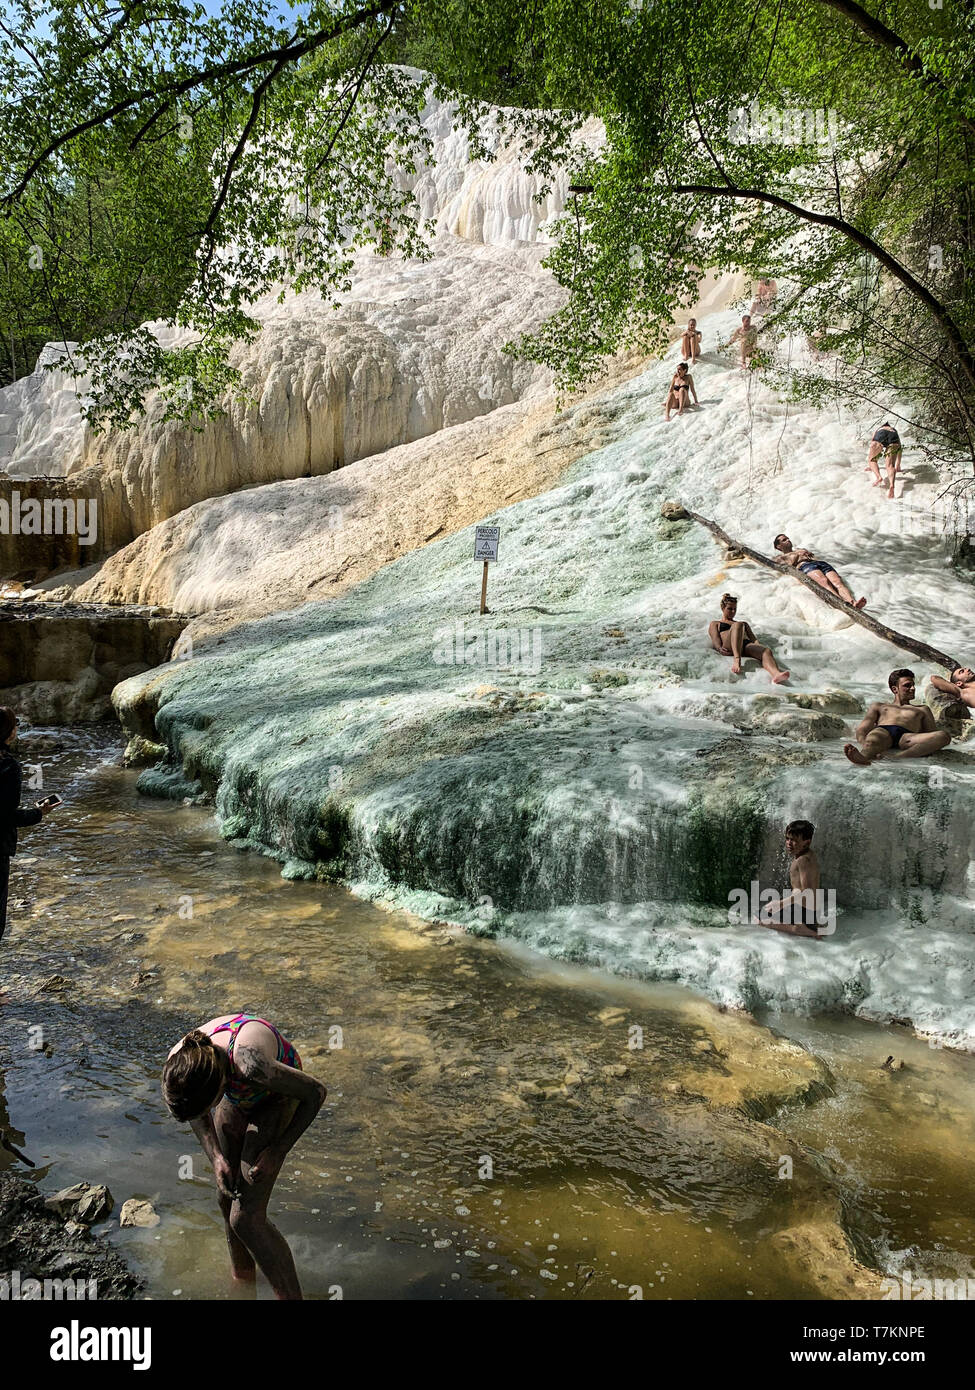 Bagni San Filippo, Italy - April 24, 2019: People rest on the thermal salt waterfalls of the mineral springs of Bagni San Filippo on a sunny day. Stock Photo